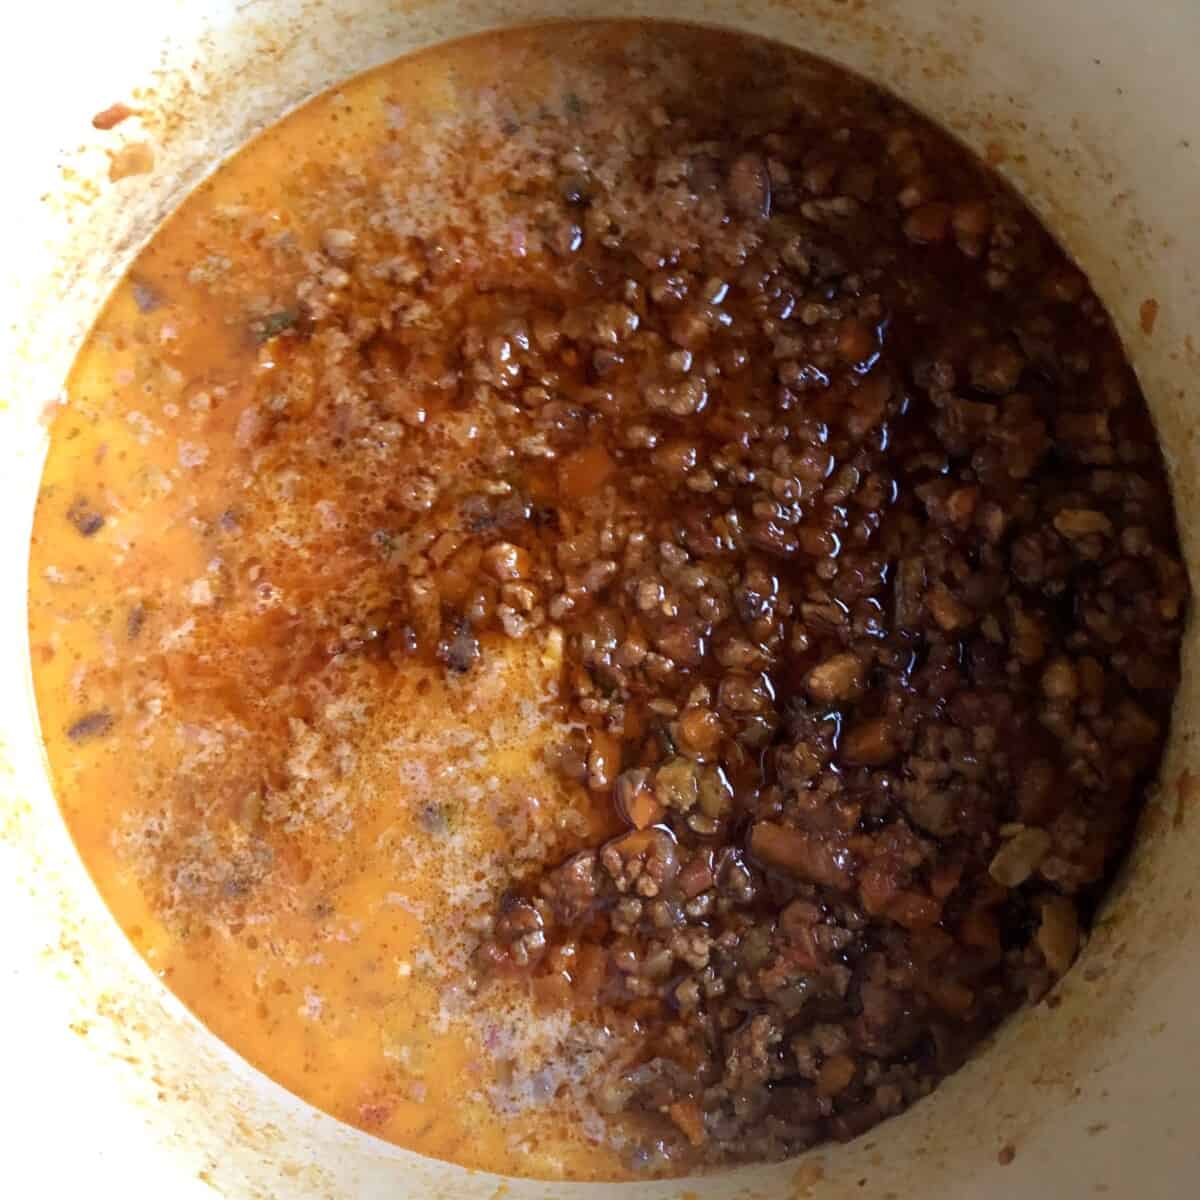 a view inside the pot after cooking 2 hours and adding milk which changed the color to bright milky orange-red